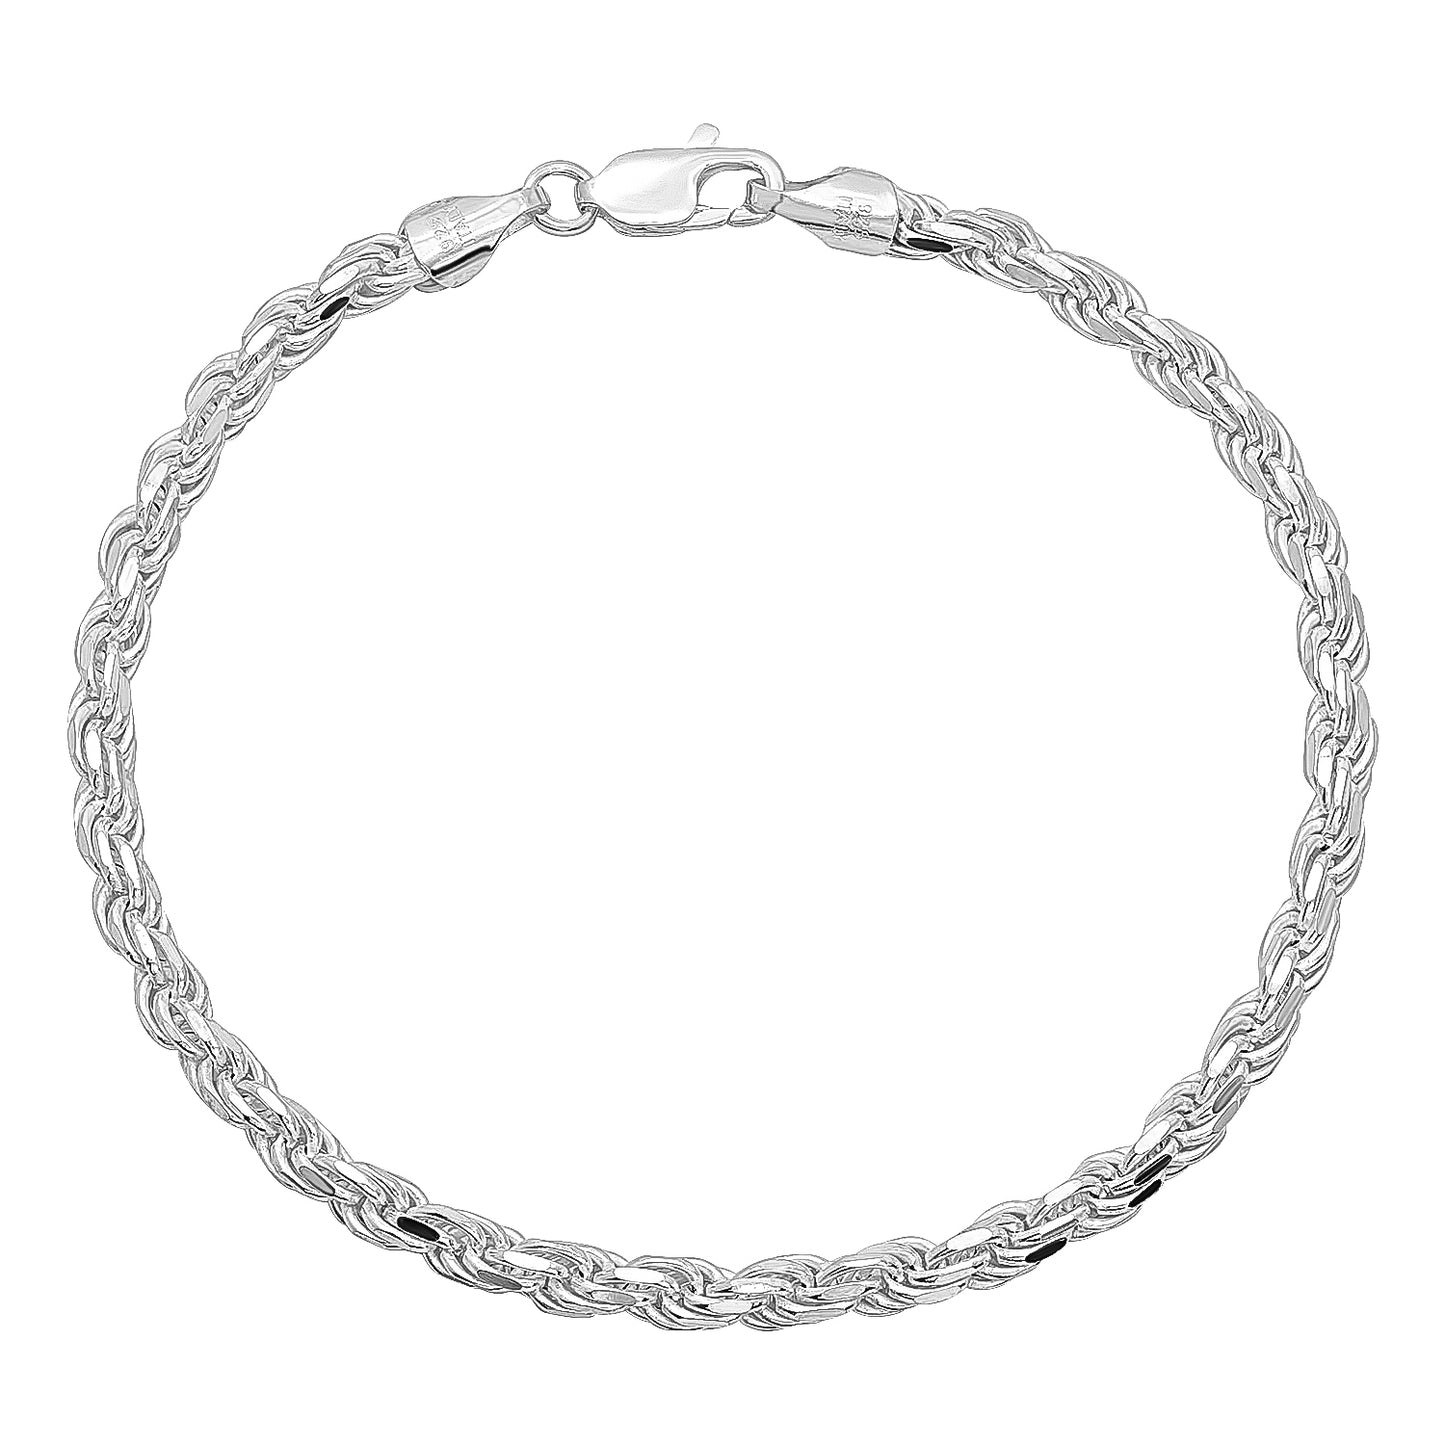 2mm-7mm Solid .925 Sterling Silver Diamond-Cut Twisted Rope Chain Necklace or Bracelet 7-30" Made In Italy (SKU: ROPE-CHAINS)